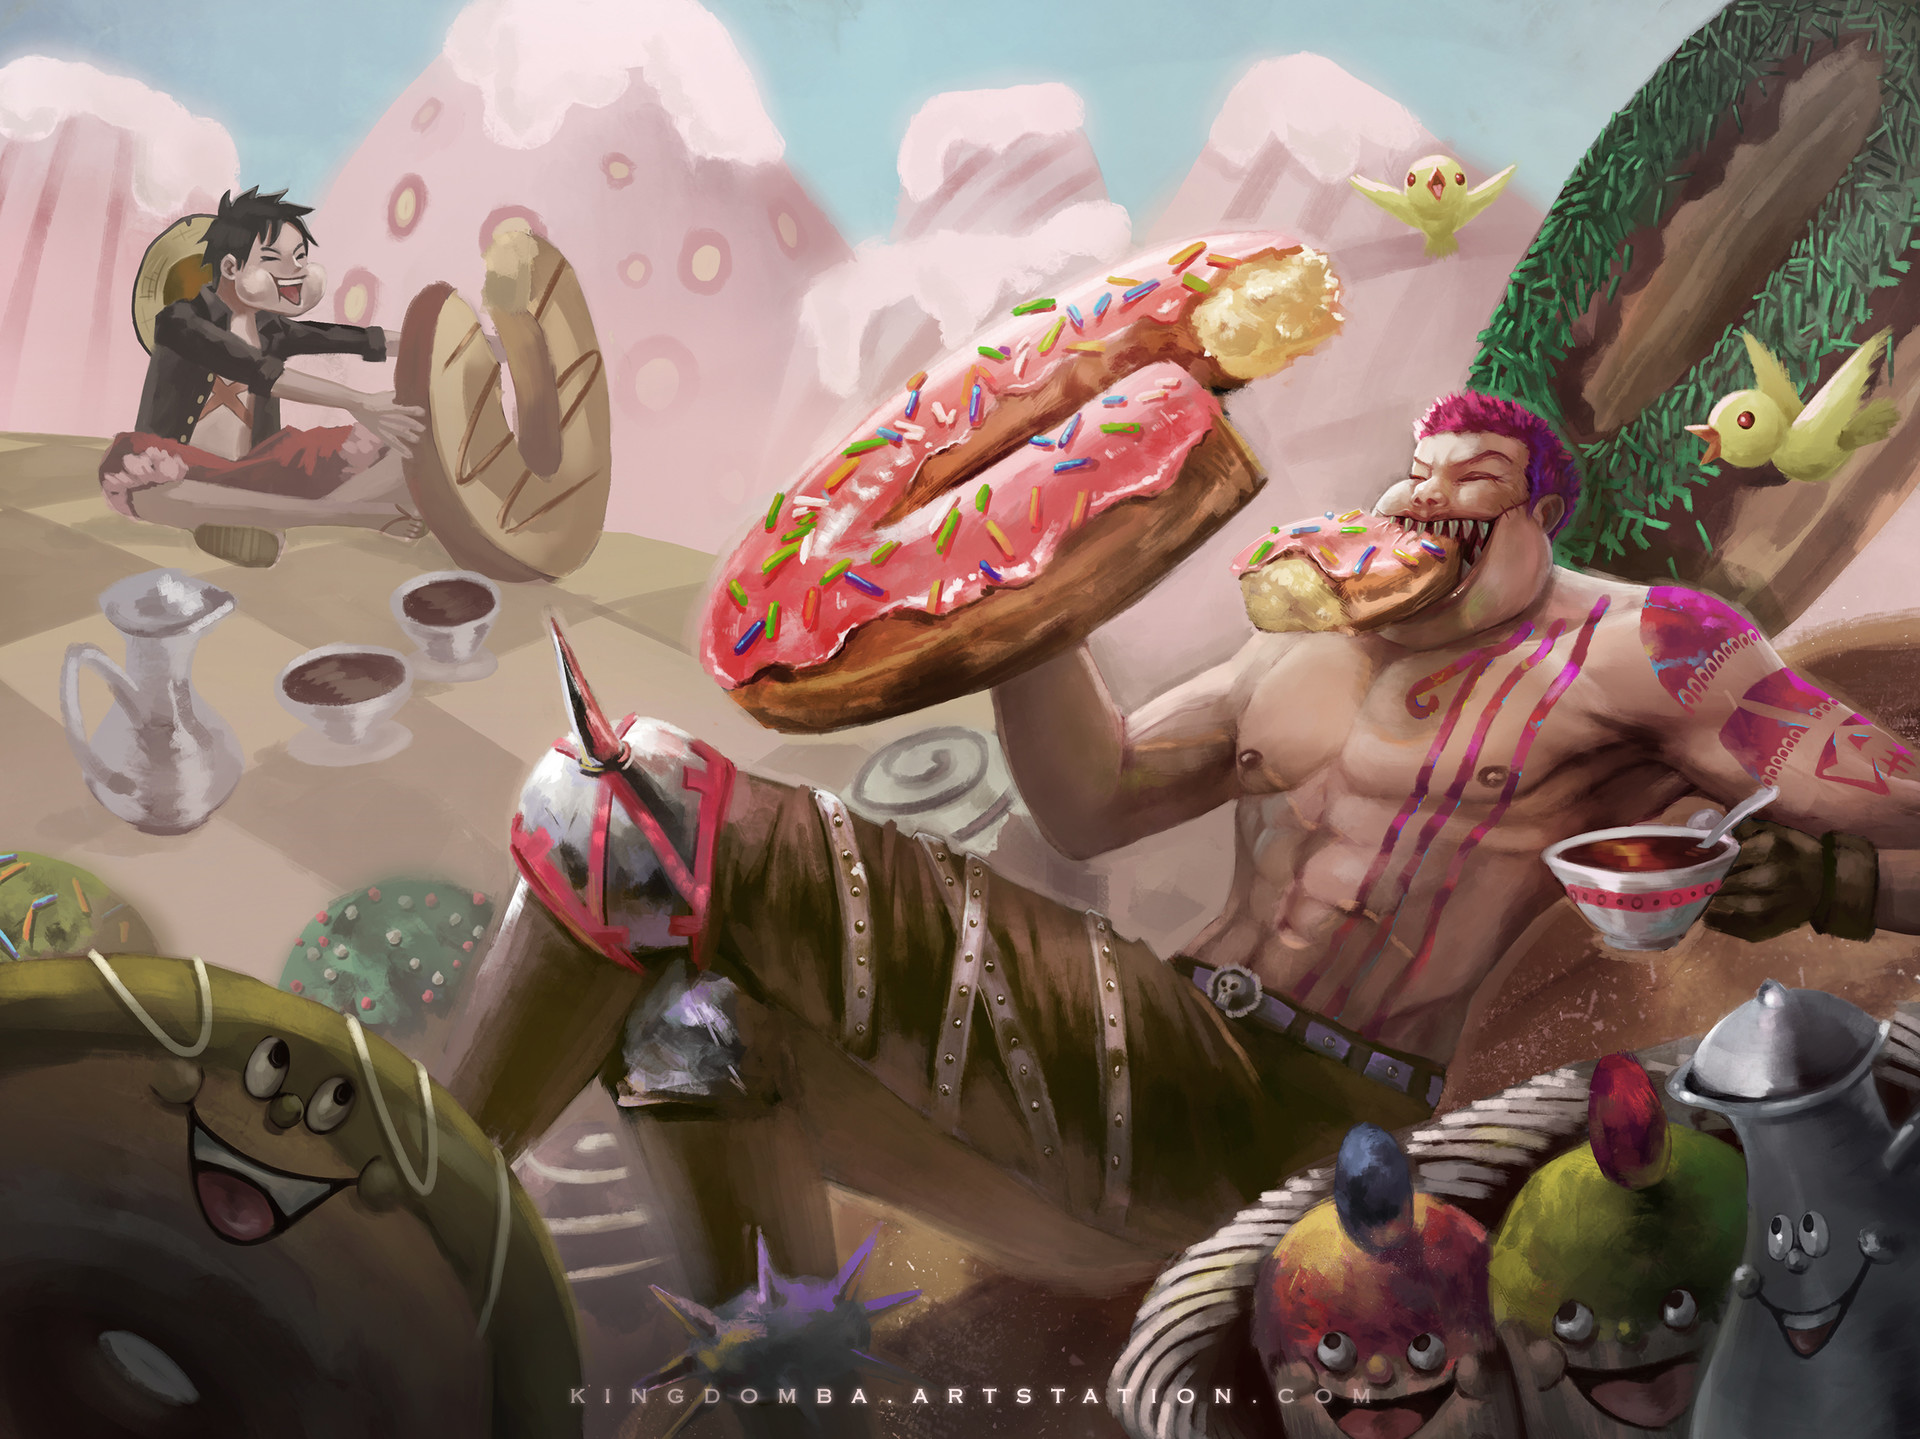 How I feel every time I eat too much breakfast by Dimas Raviandra